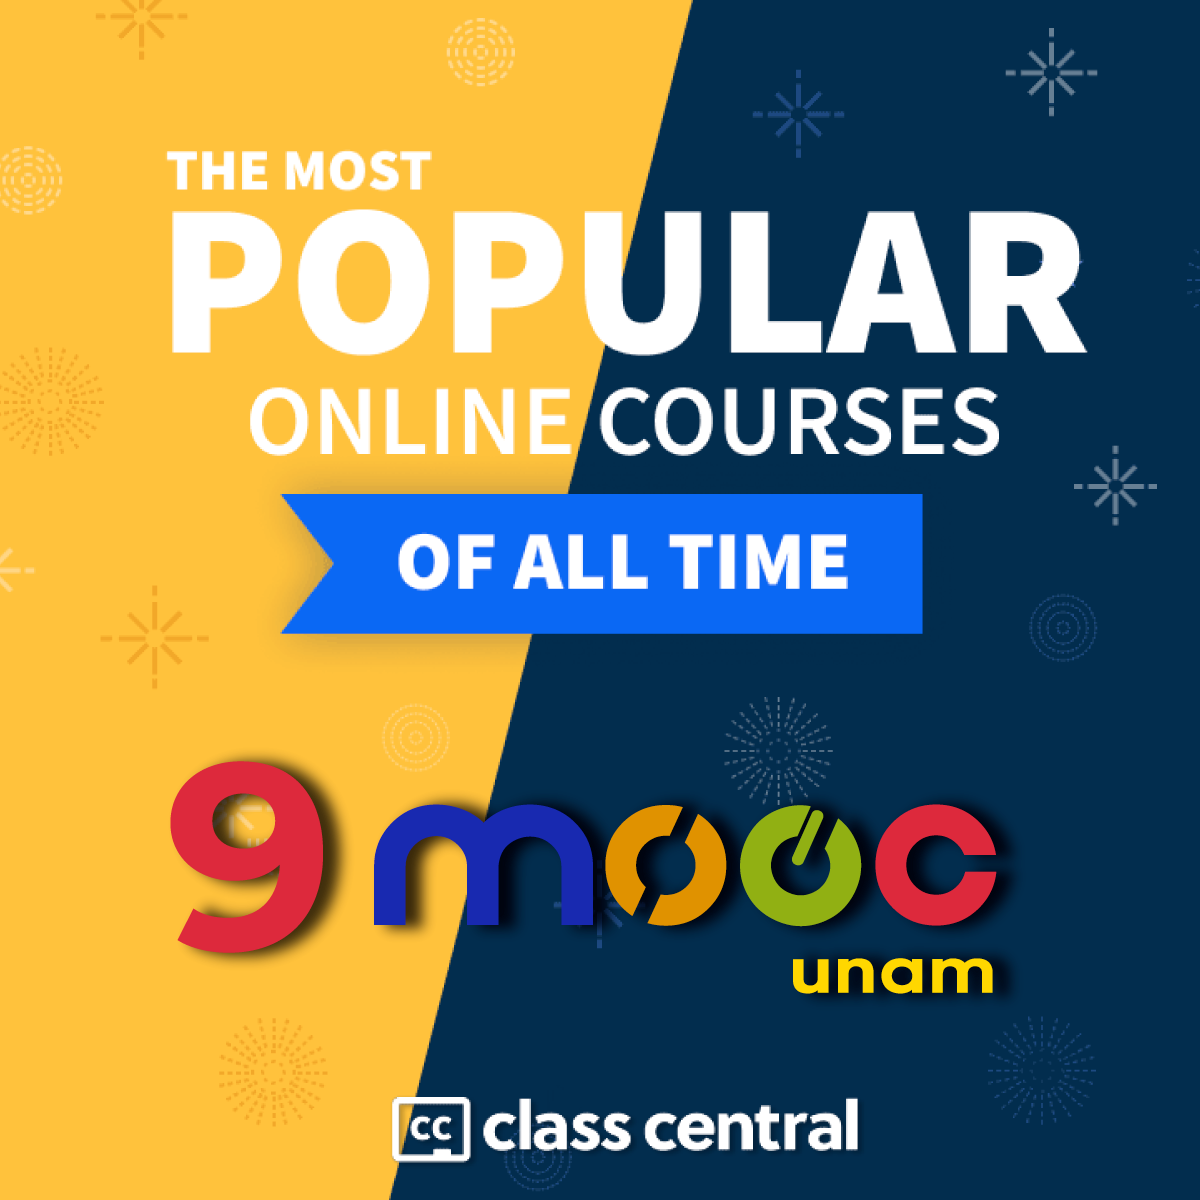 The Most Popular Online Courses of All-Time